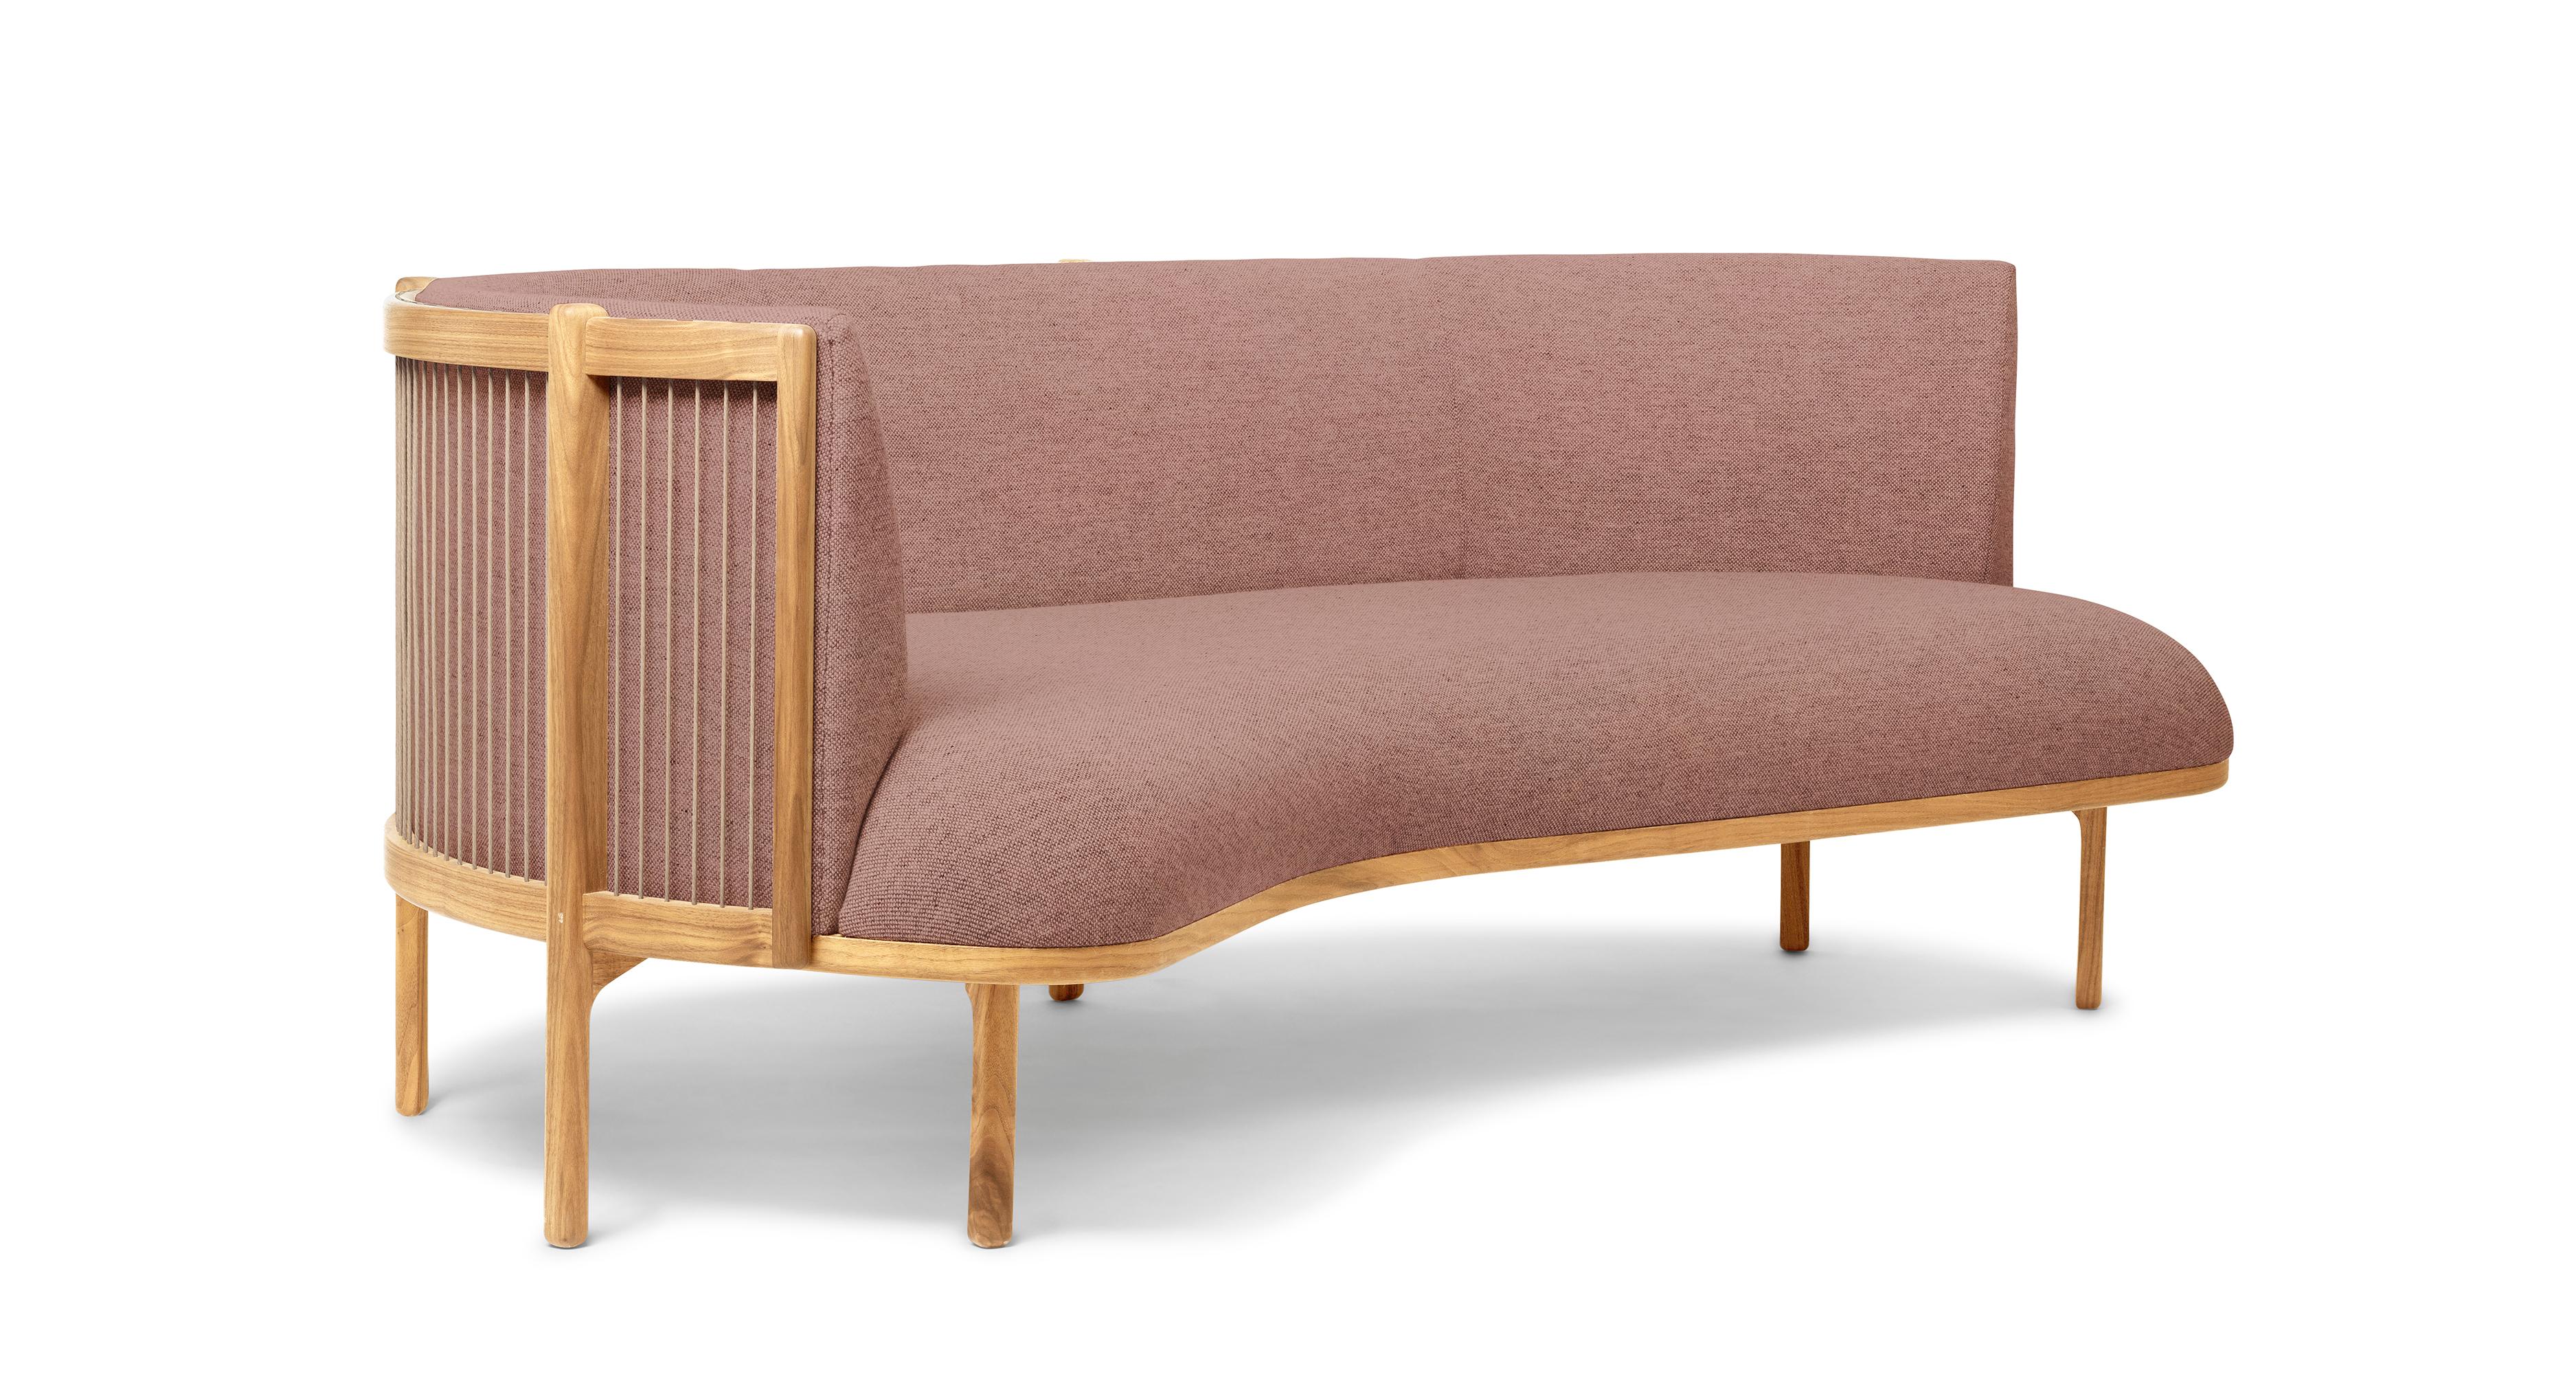 The sideways sofa from Rikke Frost combines Classic materials, wood, paper cord, and high-quality upholstery textile, with a modern asymmetric shape. The steam-bent backrest is shaped from solid wood and woven paper cord for a light, elegant